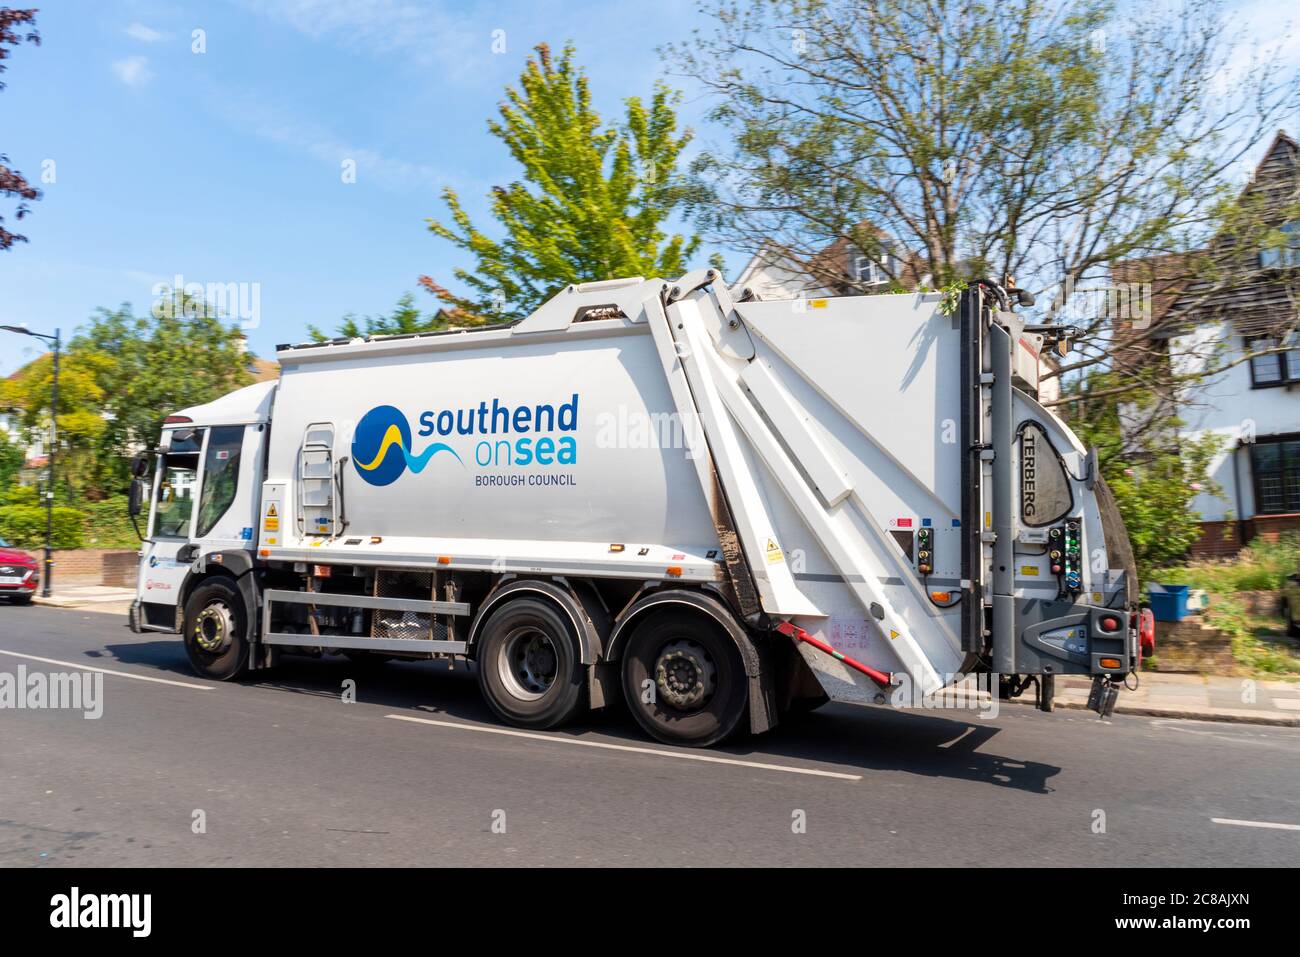 Southend on Sea Borough Council refuse truck in Westcliff on Sea, Southend, Essex, UK. Veolia Environmental Services. Bin lorry driving in street Stock Photo